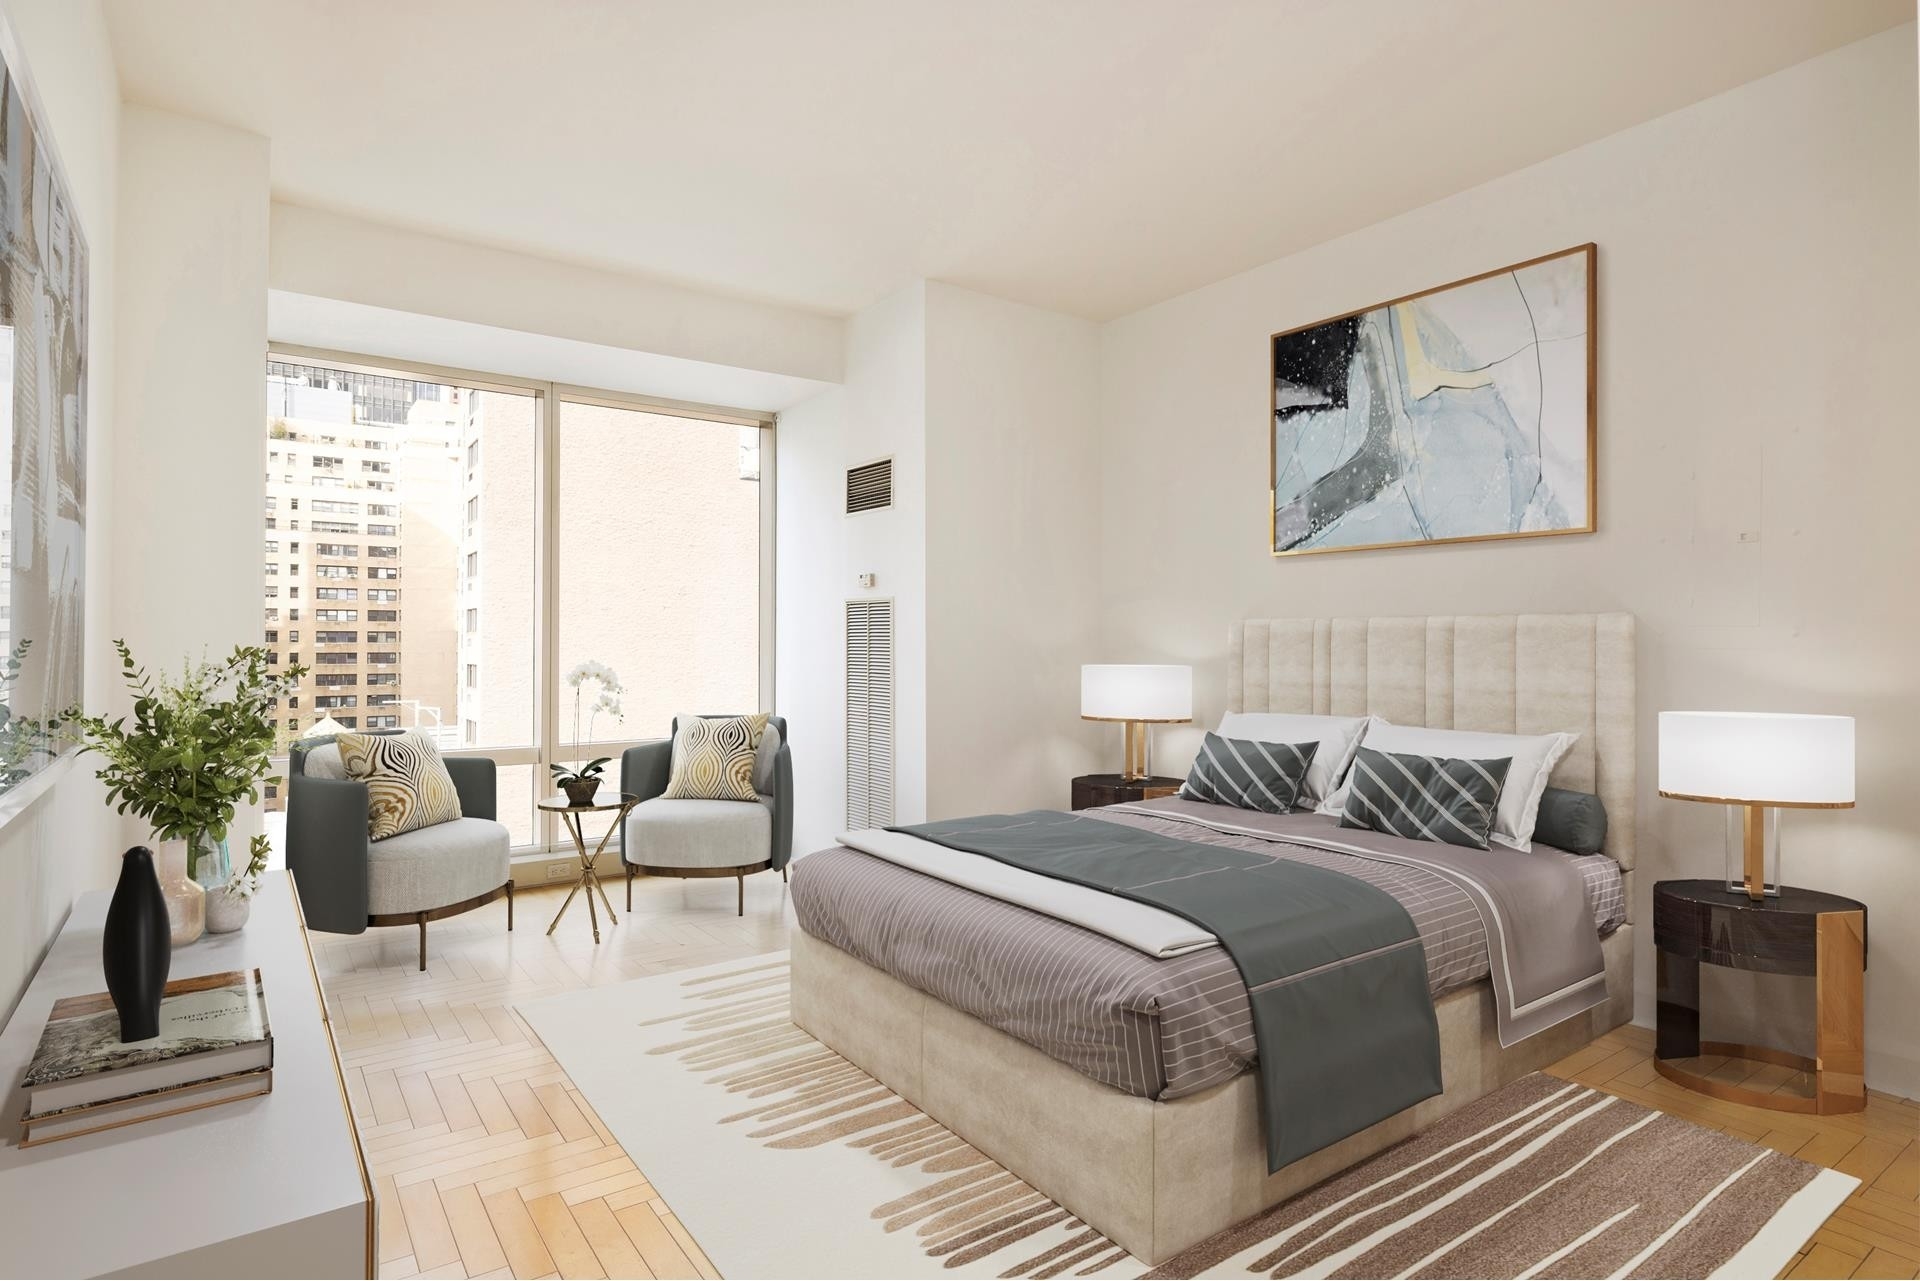 Condominium for Sale at Trump World Tower, 845 UNITED NATIONS PLZ, 11F Turtle Bay, New York, NY 10017